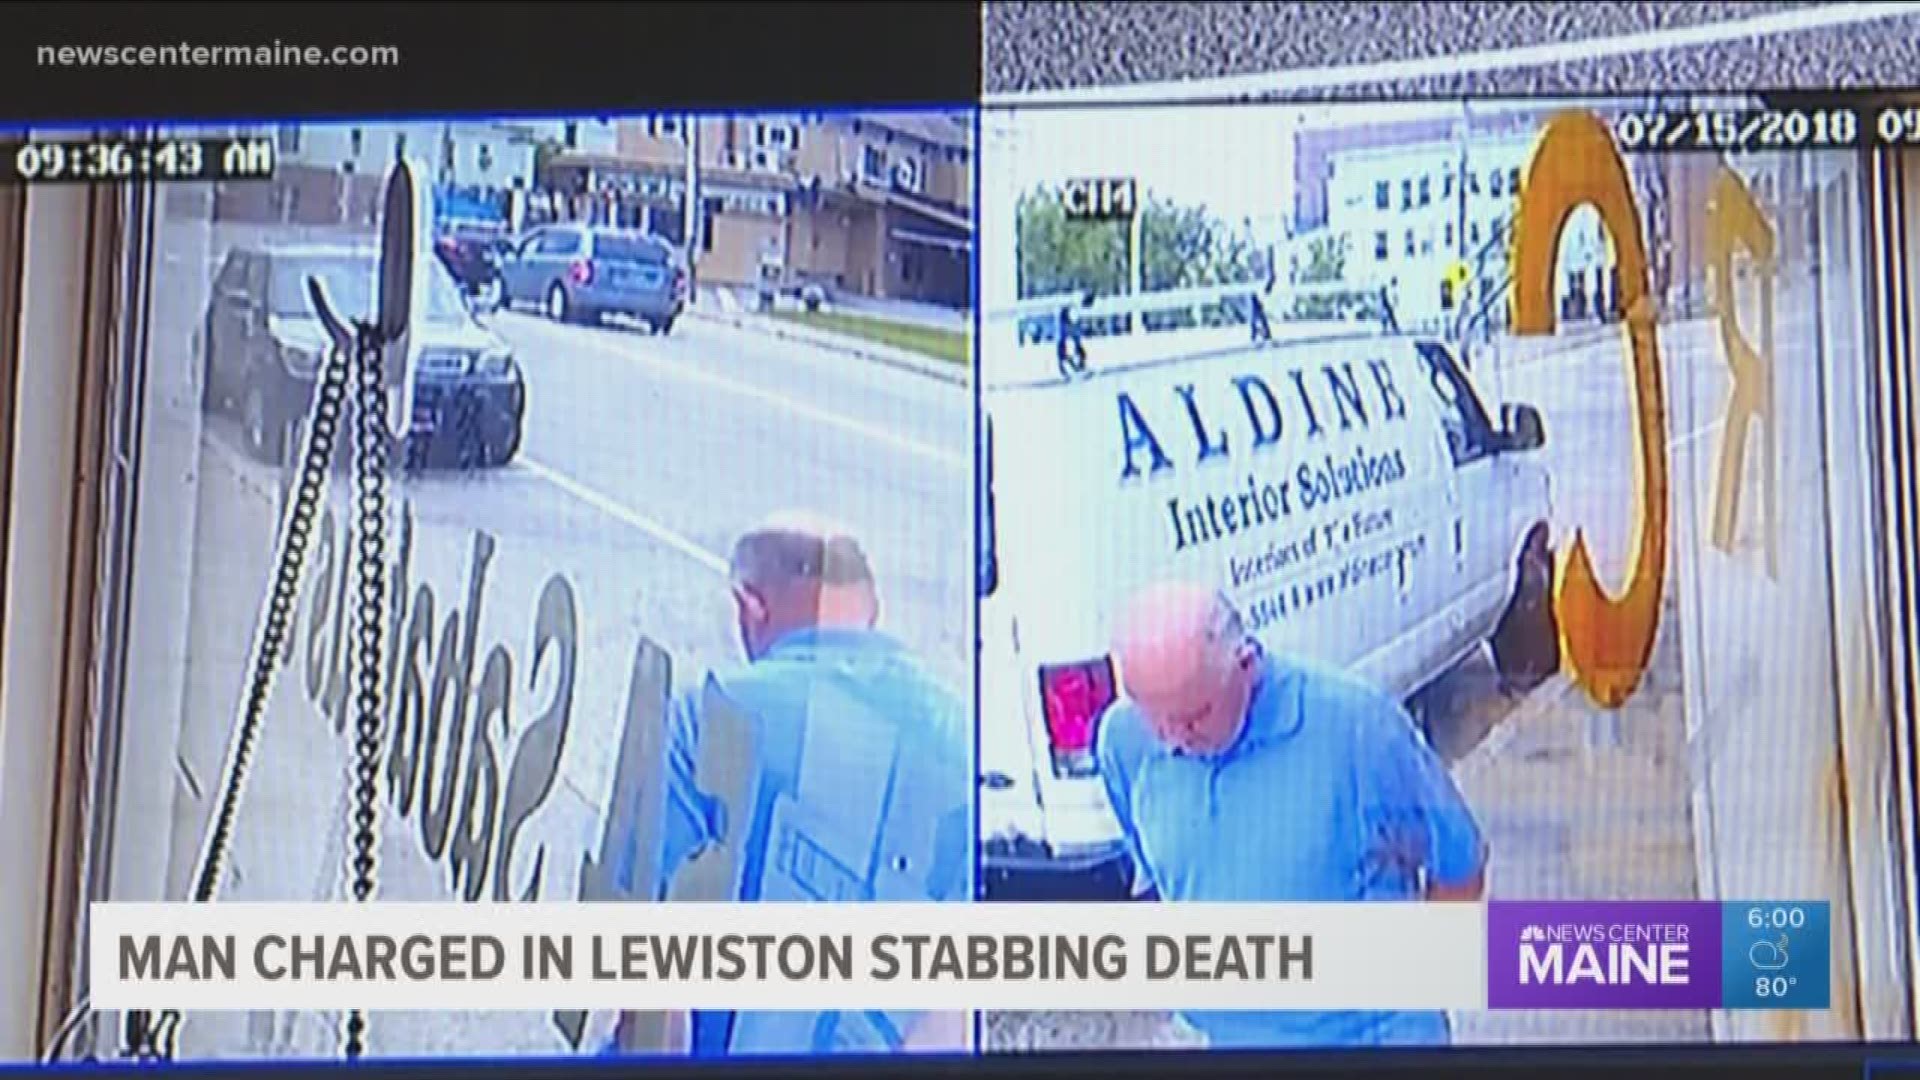 Man charged in Lewiston stabbing death